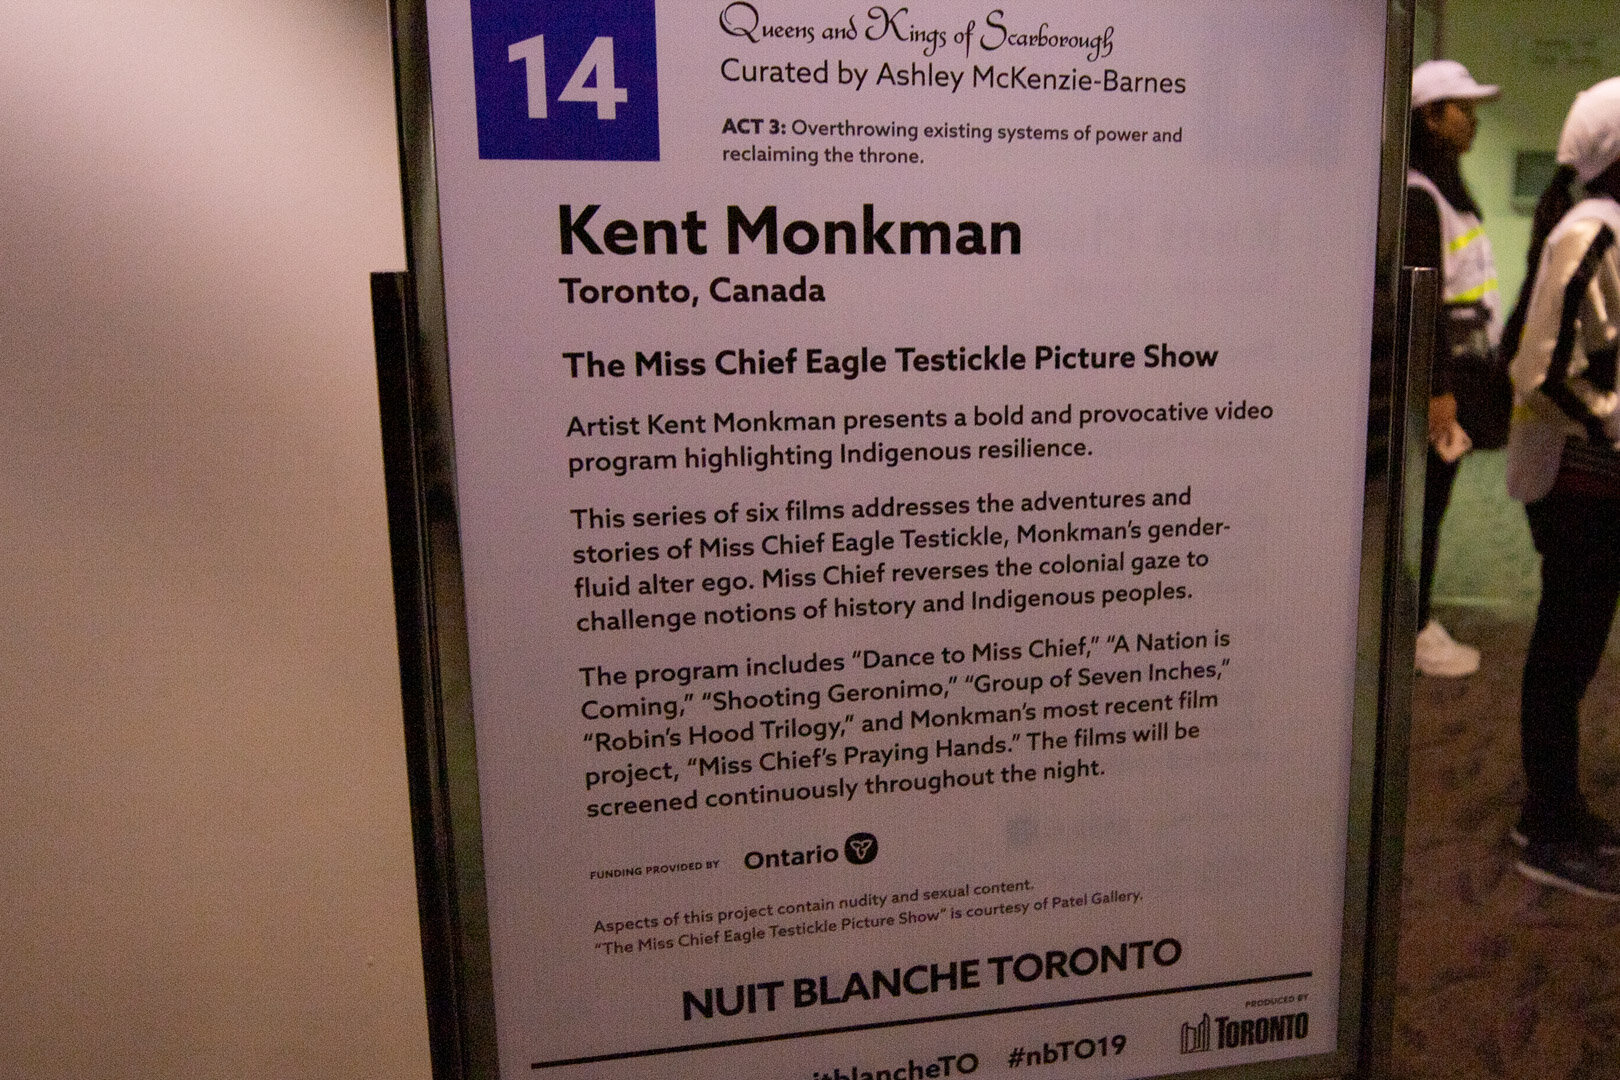   The Miss Chief Eagle Testickle Picture Show    Artist:  Kent Monkman   Medium:  Video Installation   Project Type:  Queens and Kings of Scarborough   Curator:  Ashley McKenzie-Barnes   Neighbourhood:  Scarborough  Artist Kent Monkman will present a